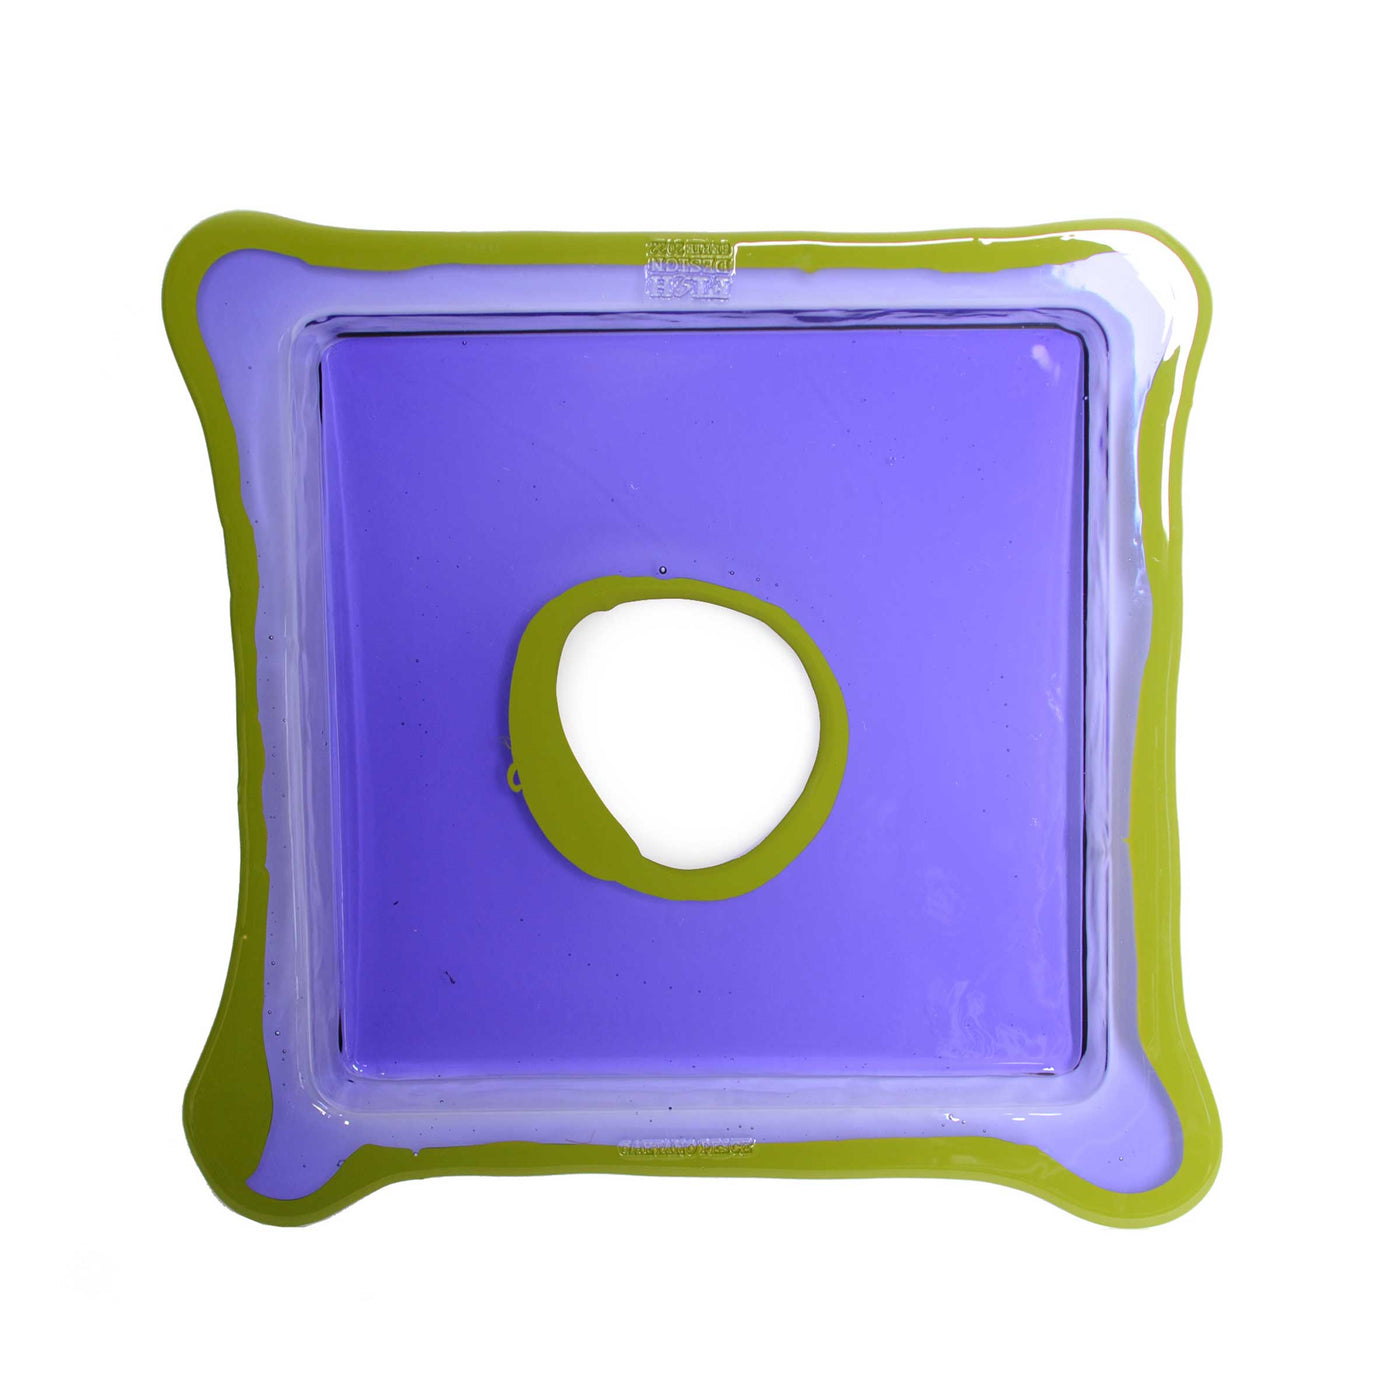 Resin Square Tray TRY-TRAY Purple by Gaetano Pesce for Fish Design 02